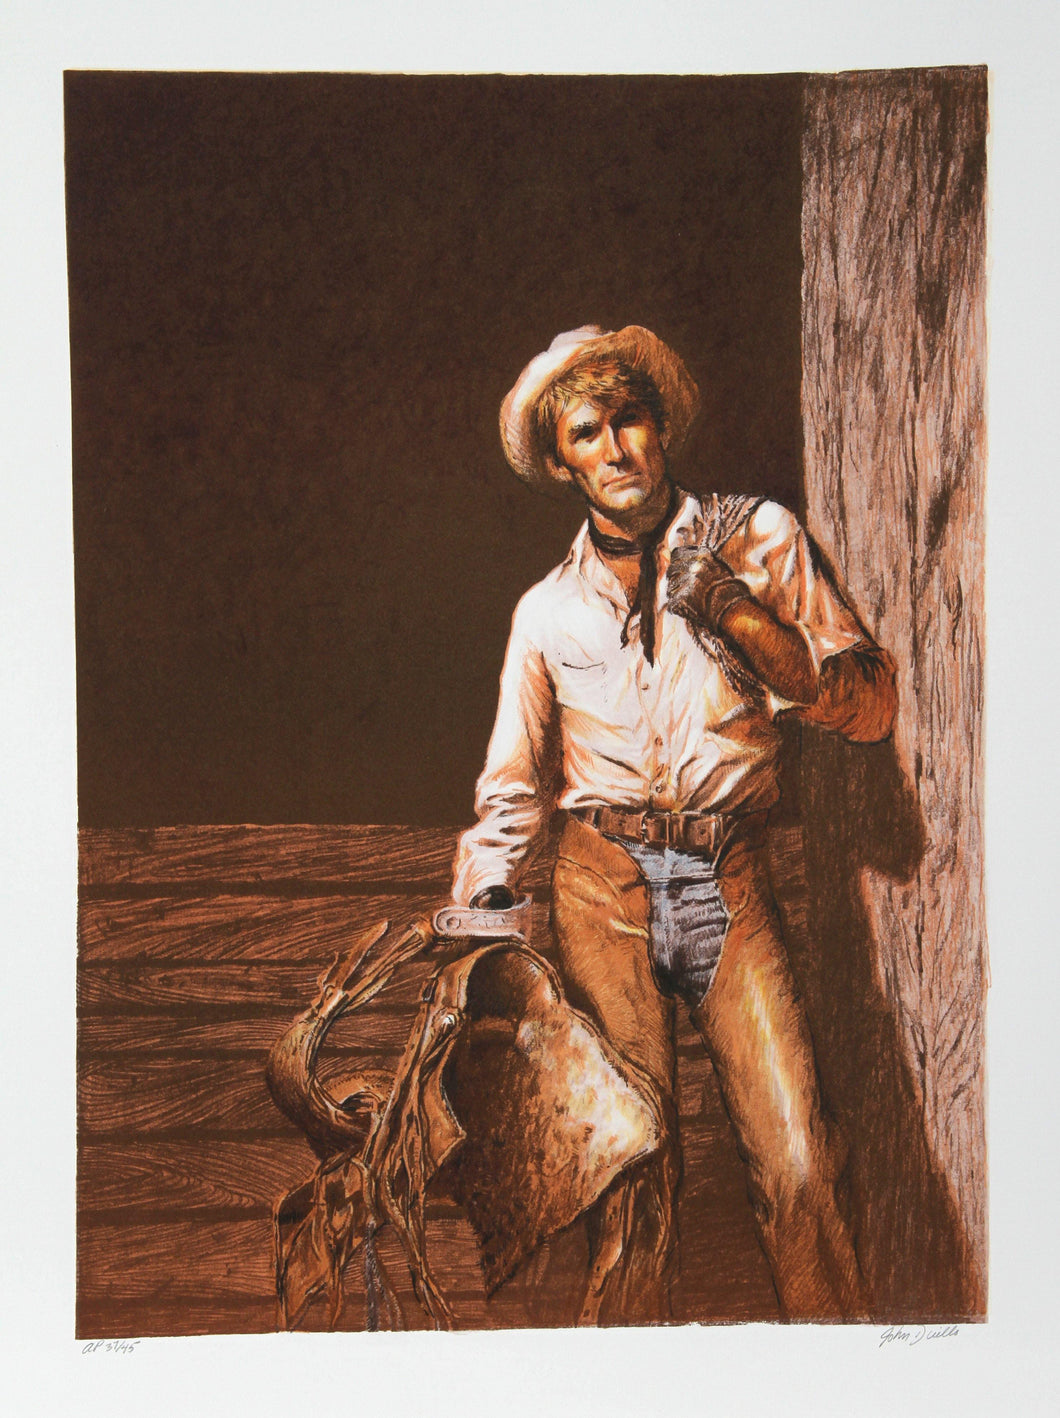 The Cowboy Lithograph | John Duillo,{{product.type}}